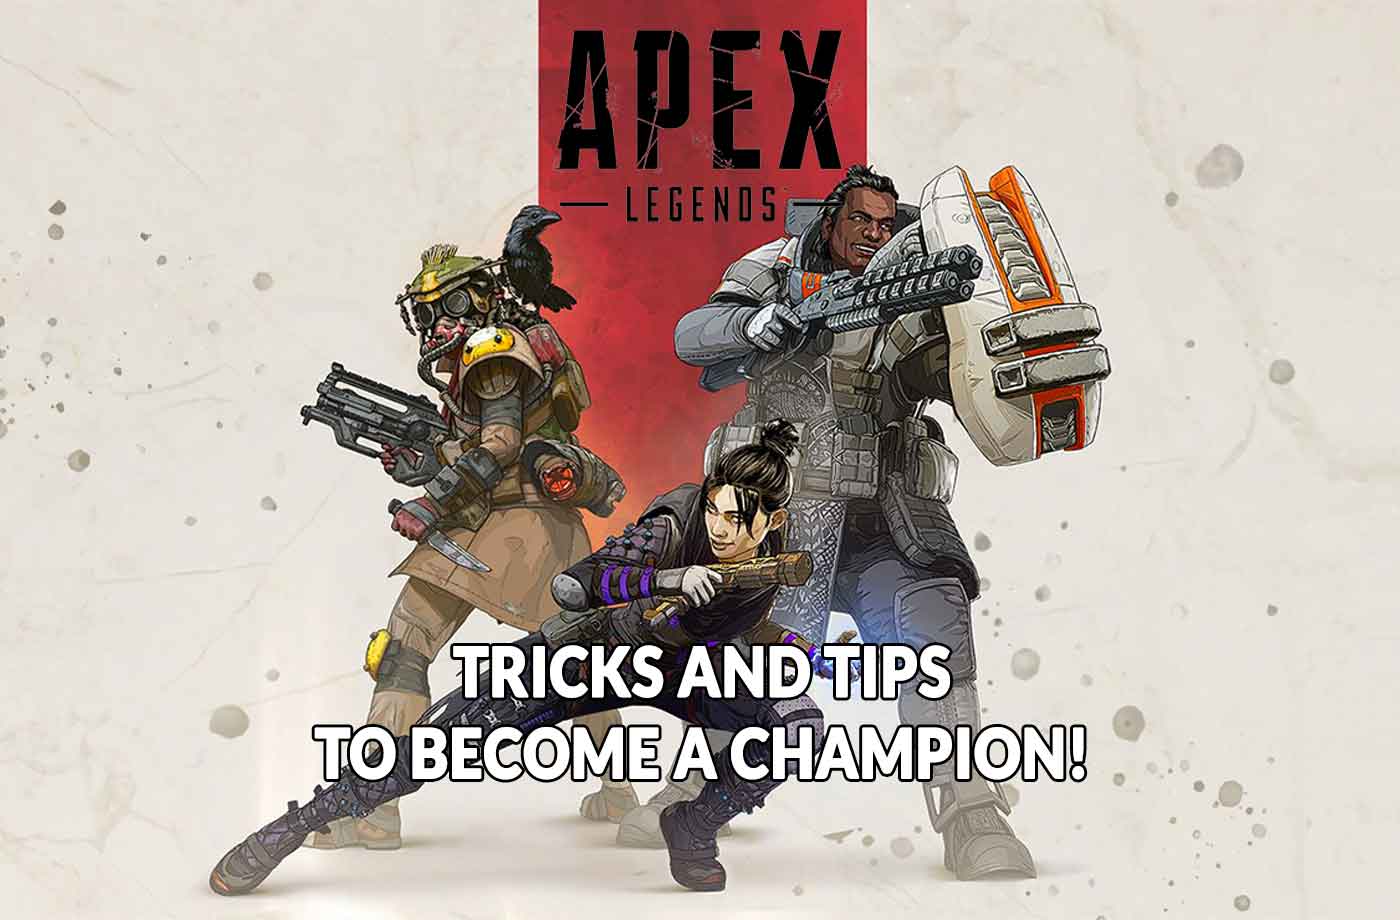 Guide Apex Legends tips and tricks to the champion of the game